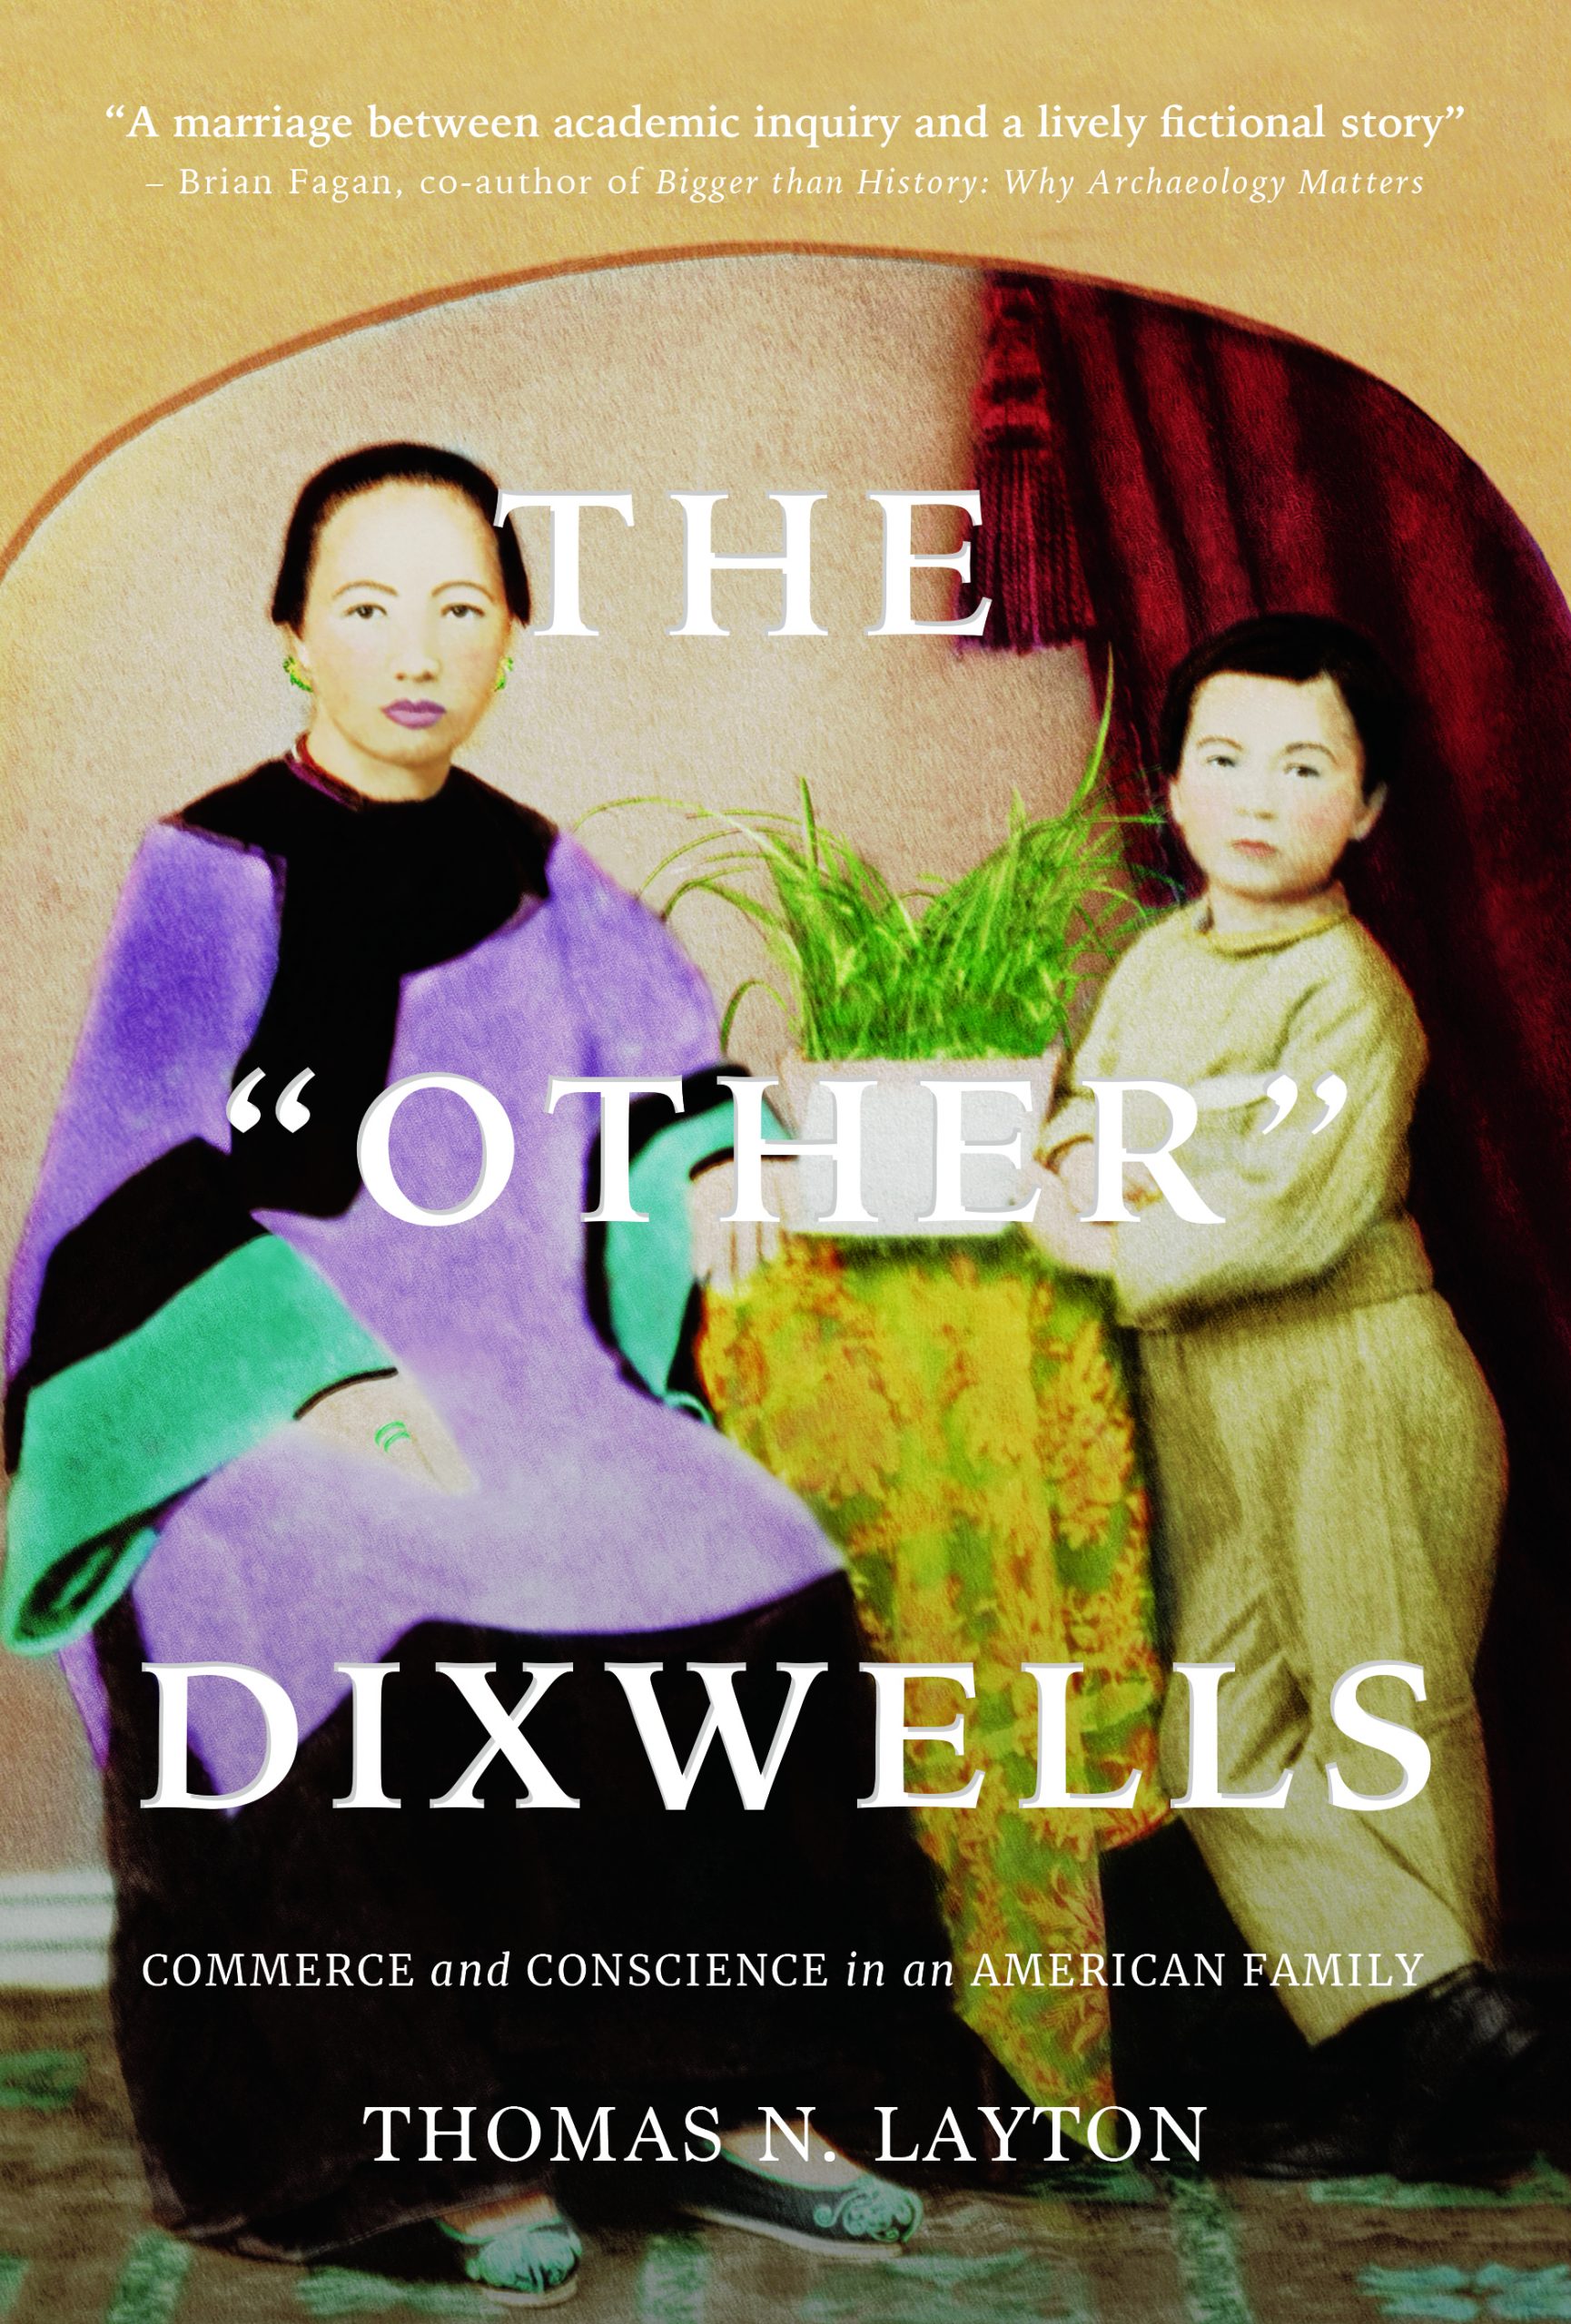 THE OTHER DIXWELLS: COMMERCE AND CONSCIENCE IN AN AMERICAN FAMILY